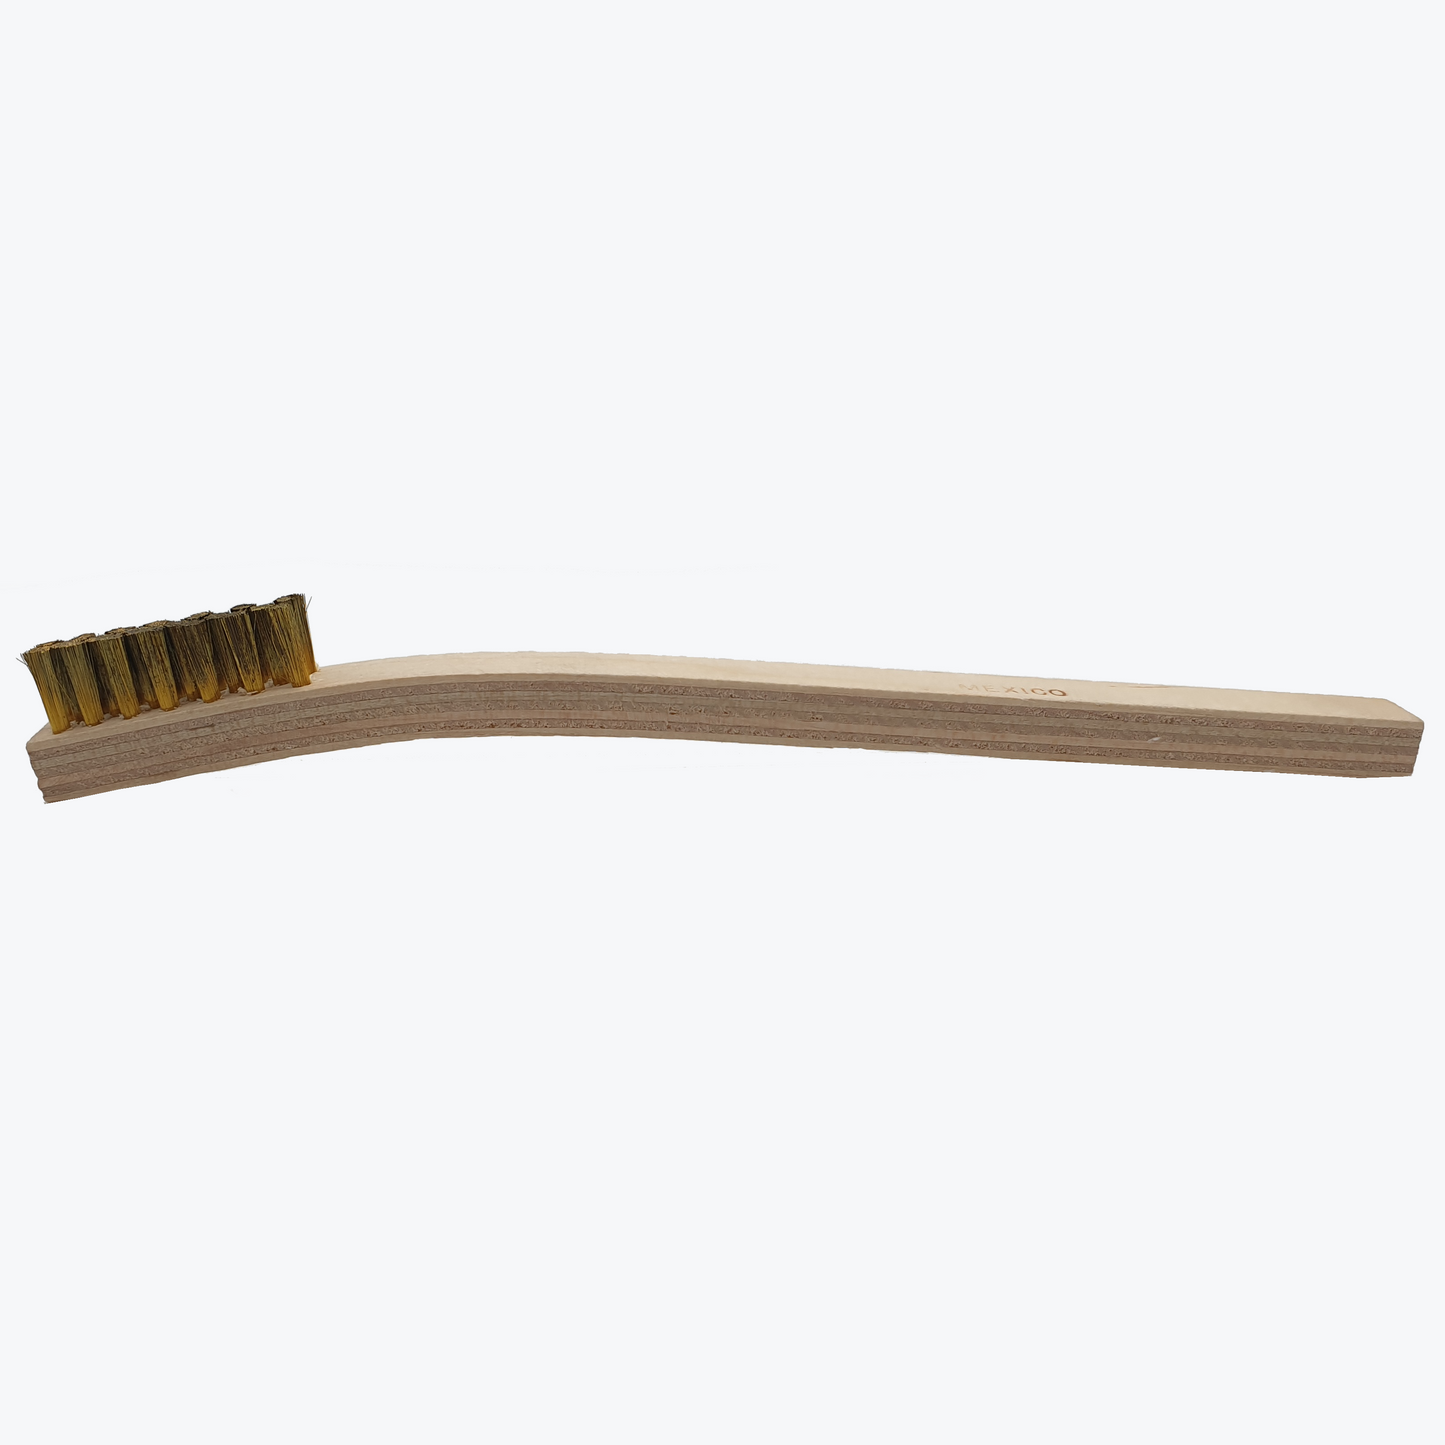 Techspray antistatic esd safe soft brass wooden handle brush 2025-1 pcb board coating and cleaning tool